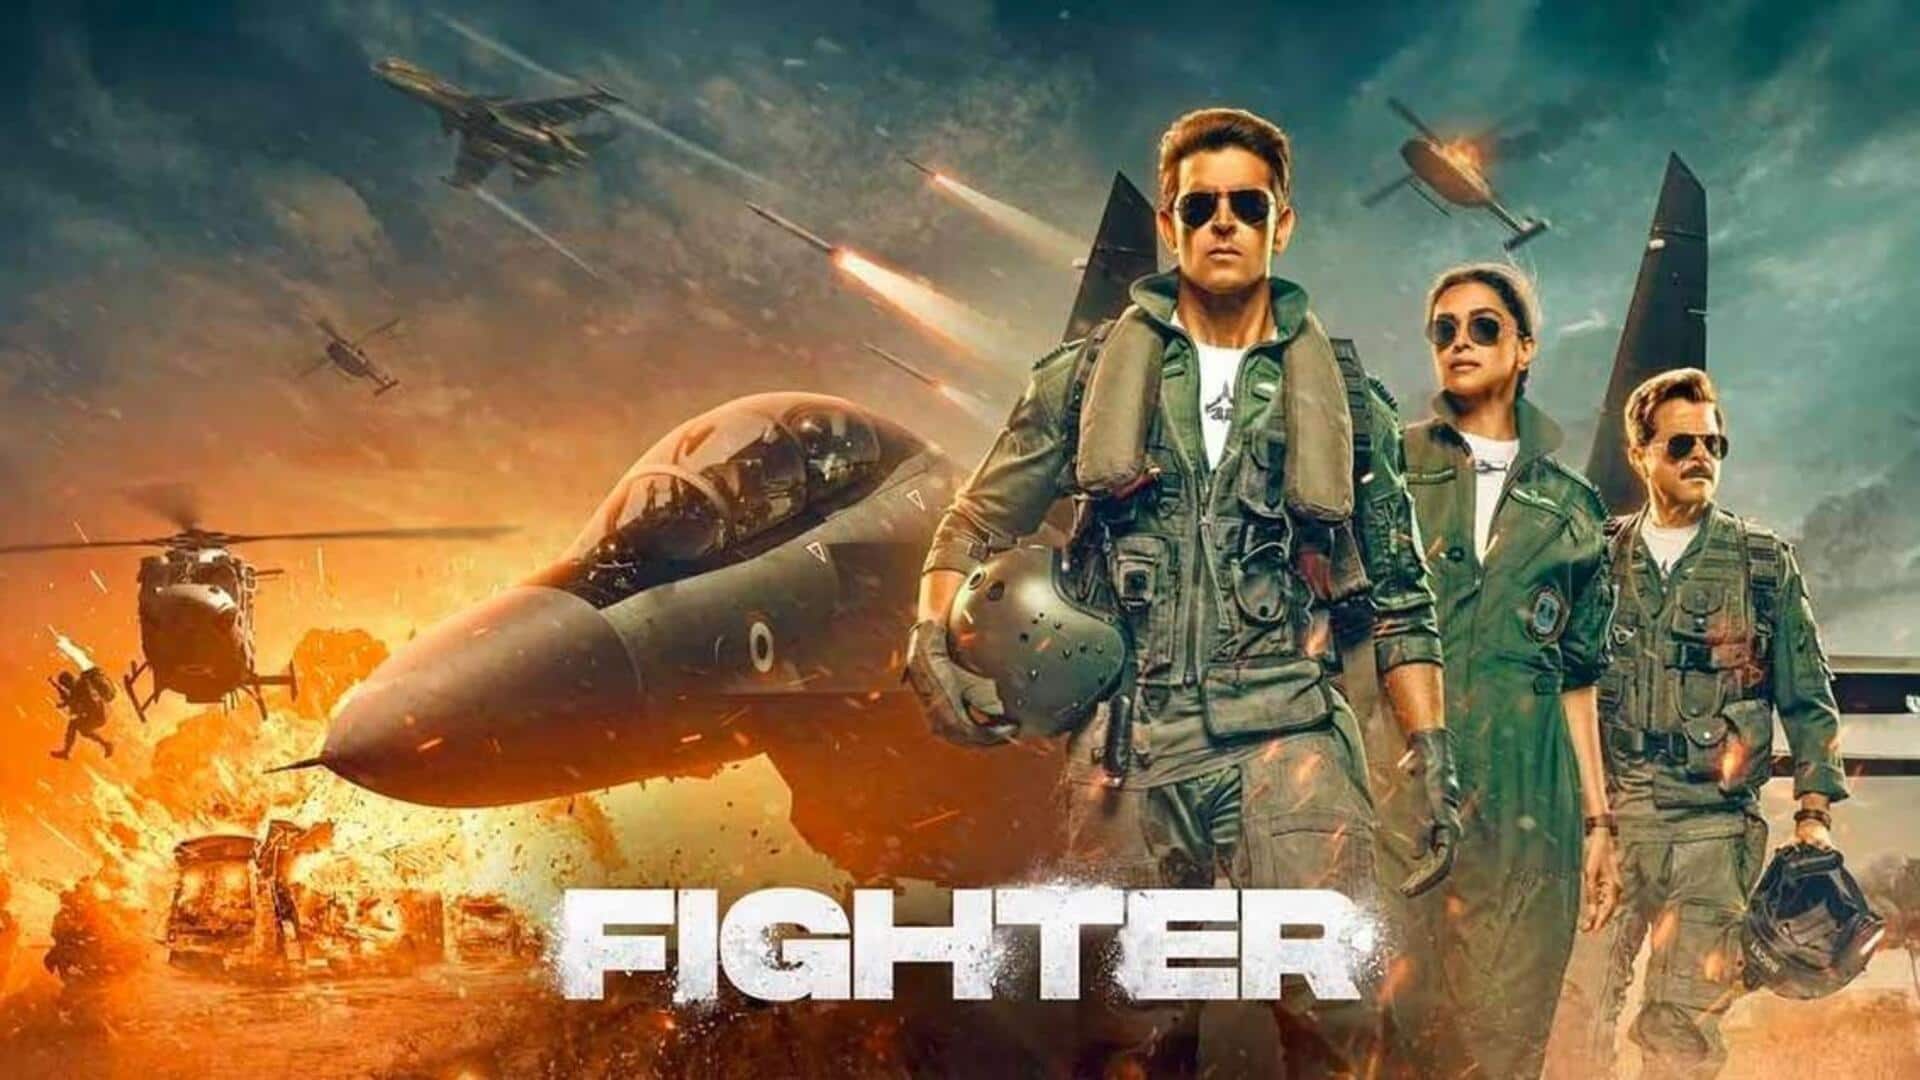 Box office: Siddharth Anand's 'Fighter's weekday collections witness unforeseen decline